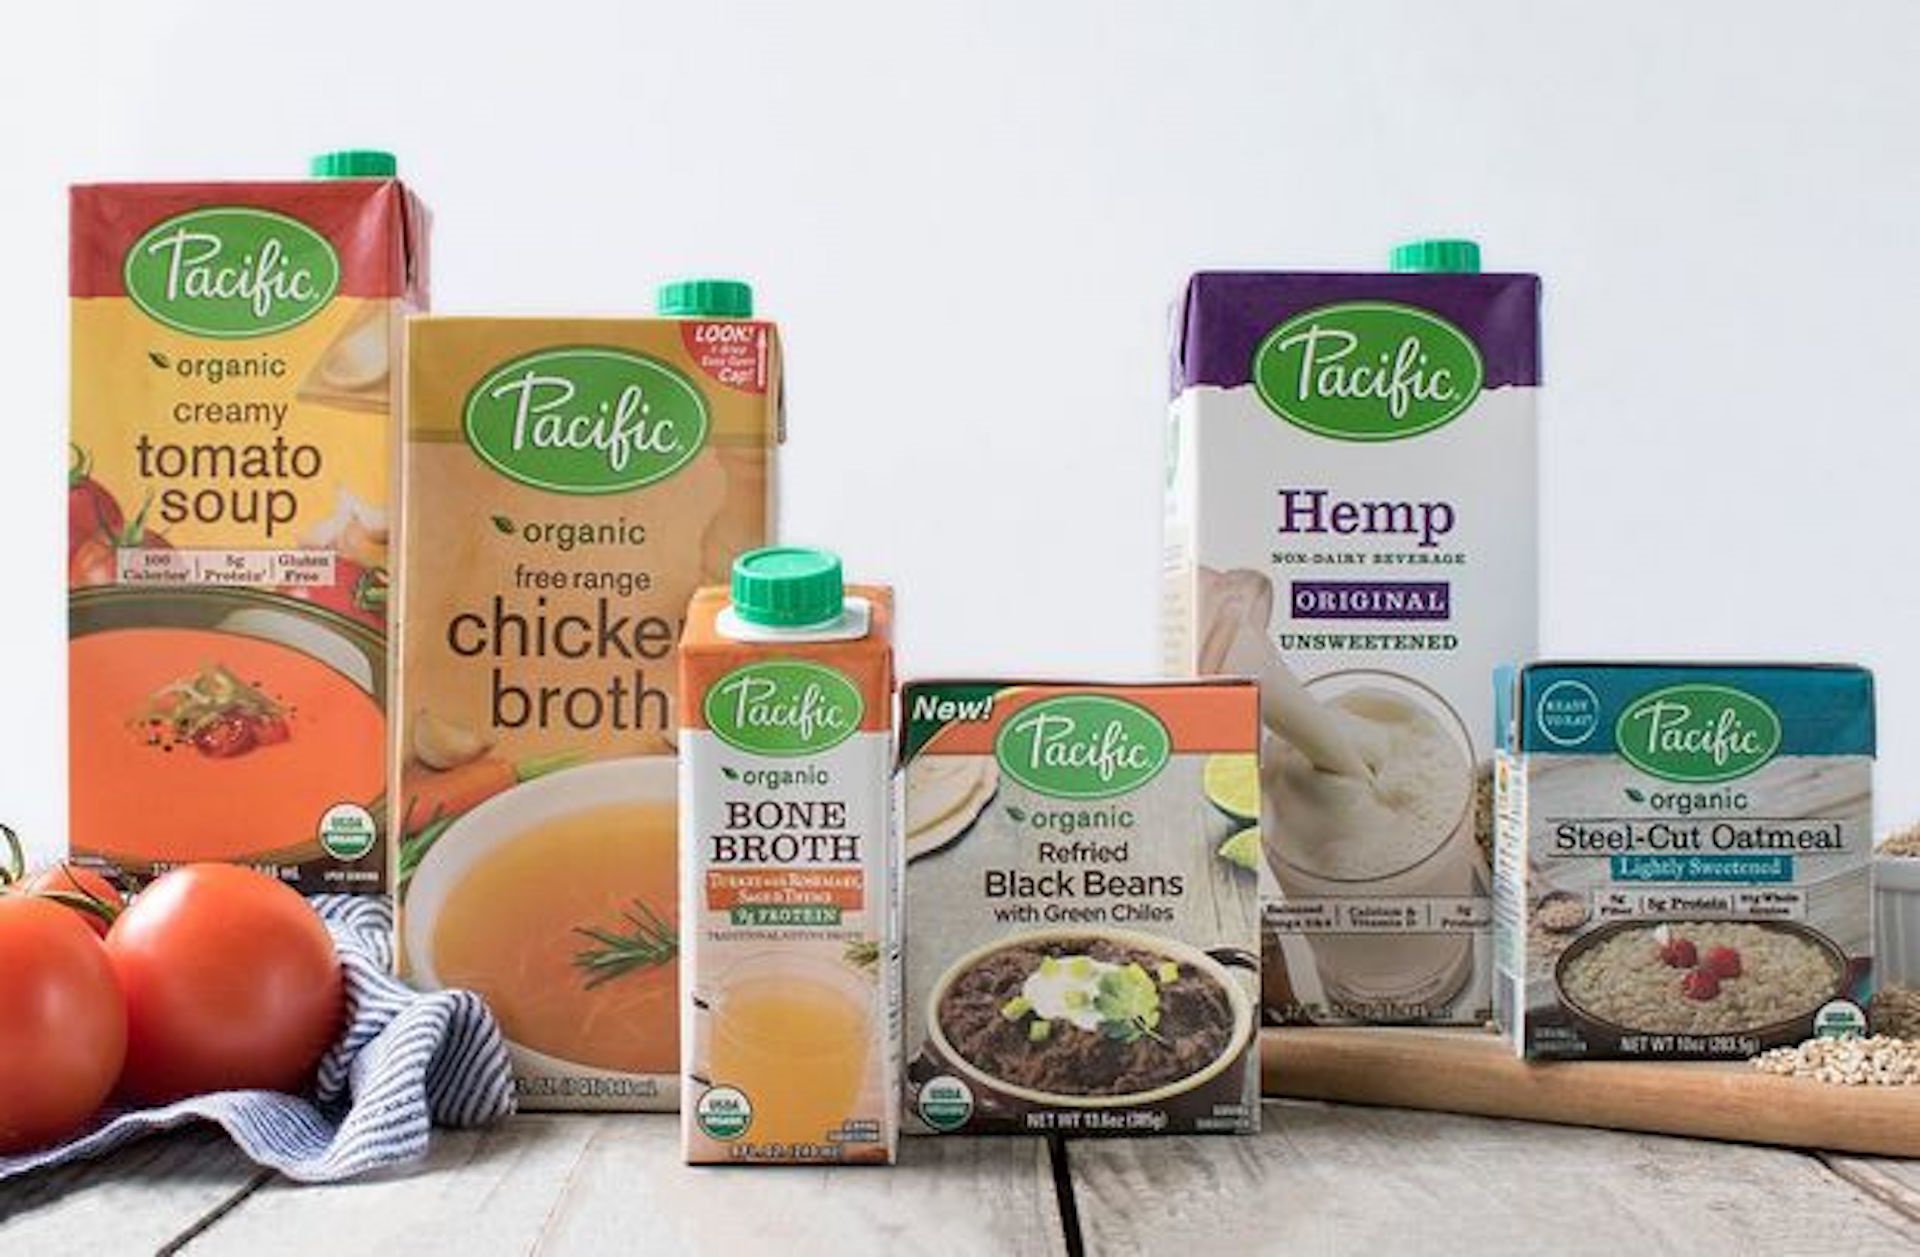 Campbell Just Bought Another Soup Company for $700M